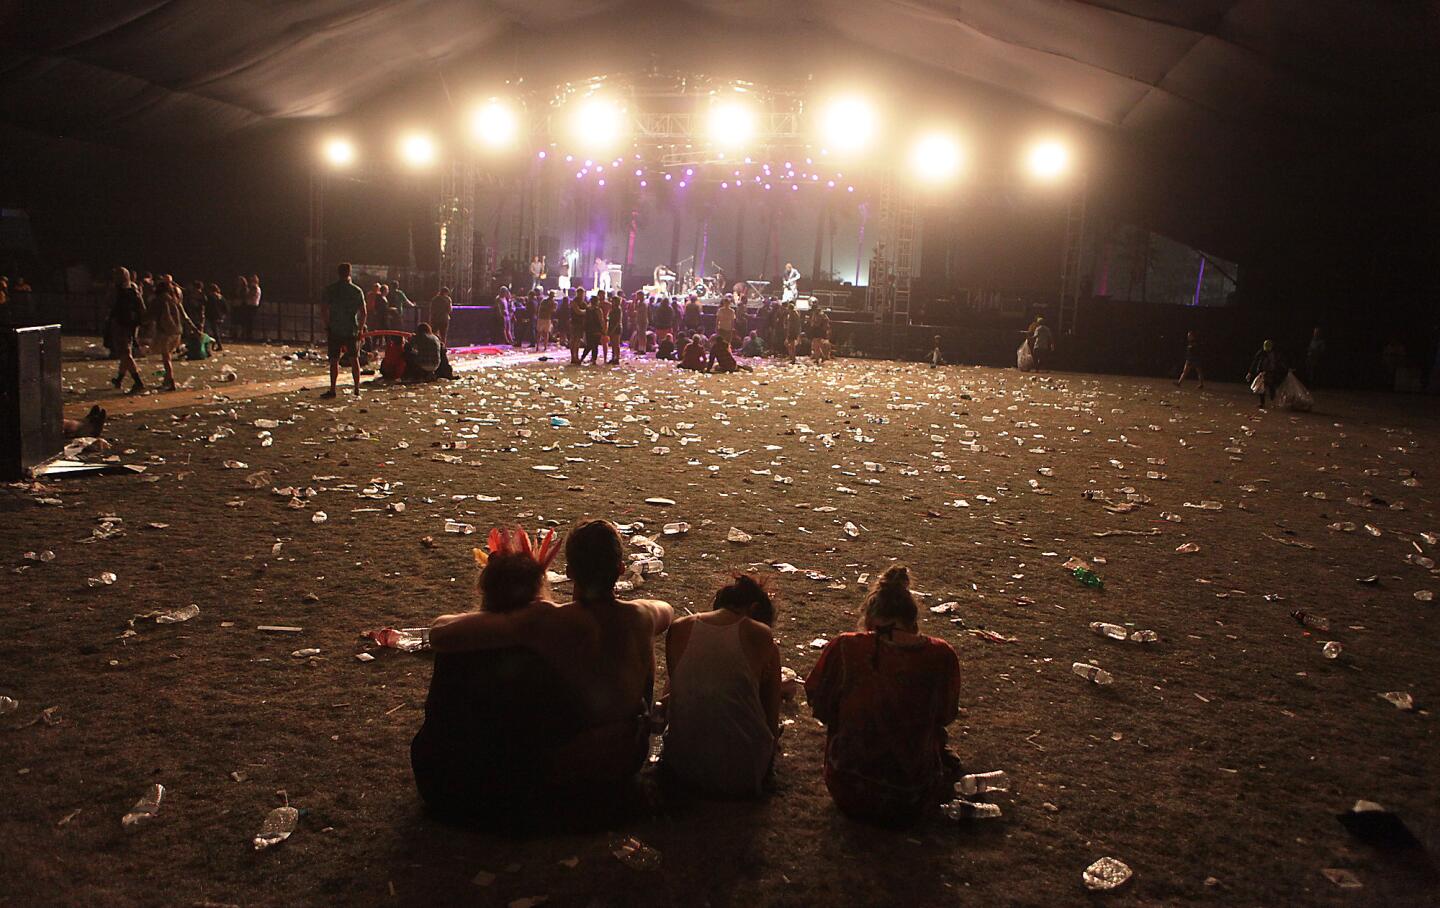 Fans sit on a trash-strewn lawn in front of the Gobi stage between shows on the second day of the Coachella Valley Music and Arts Festival in Indio.